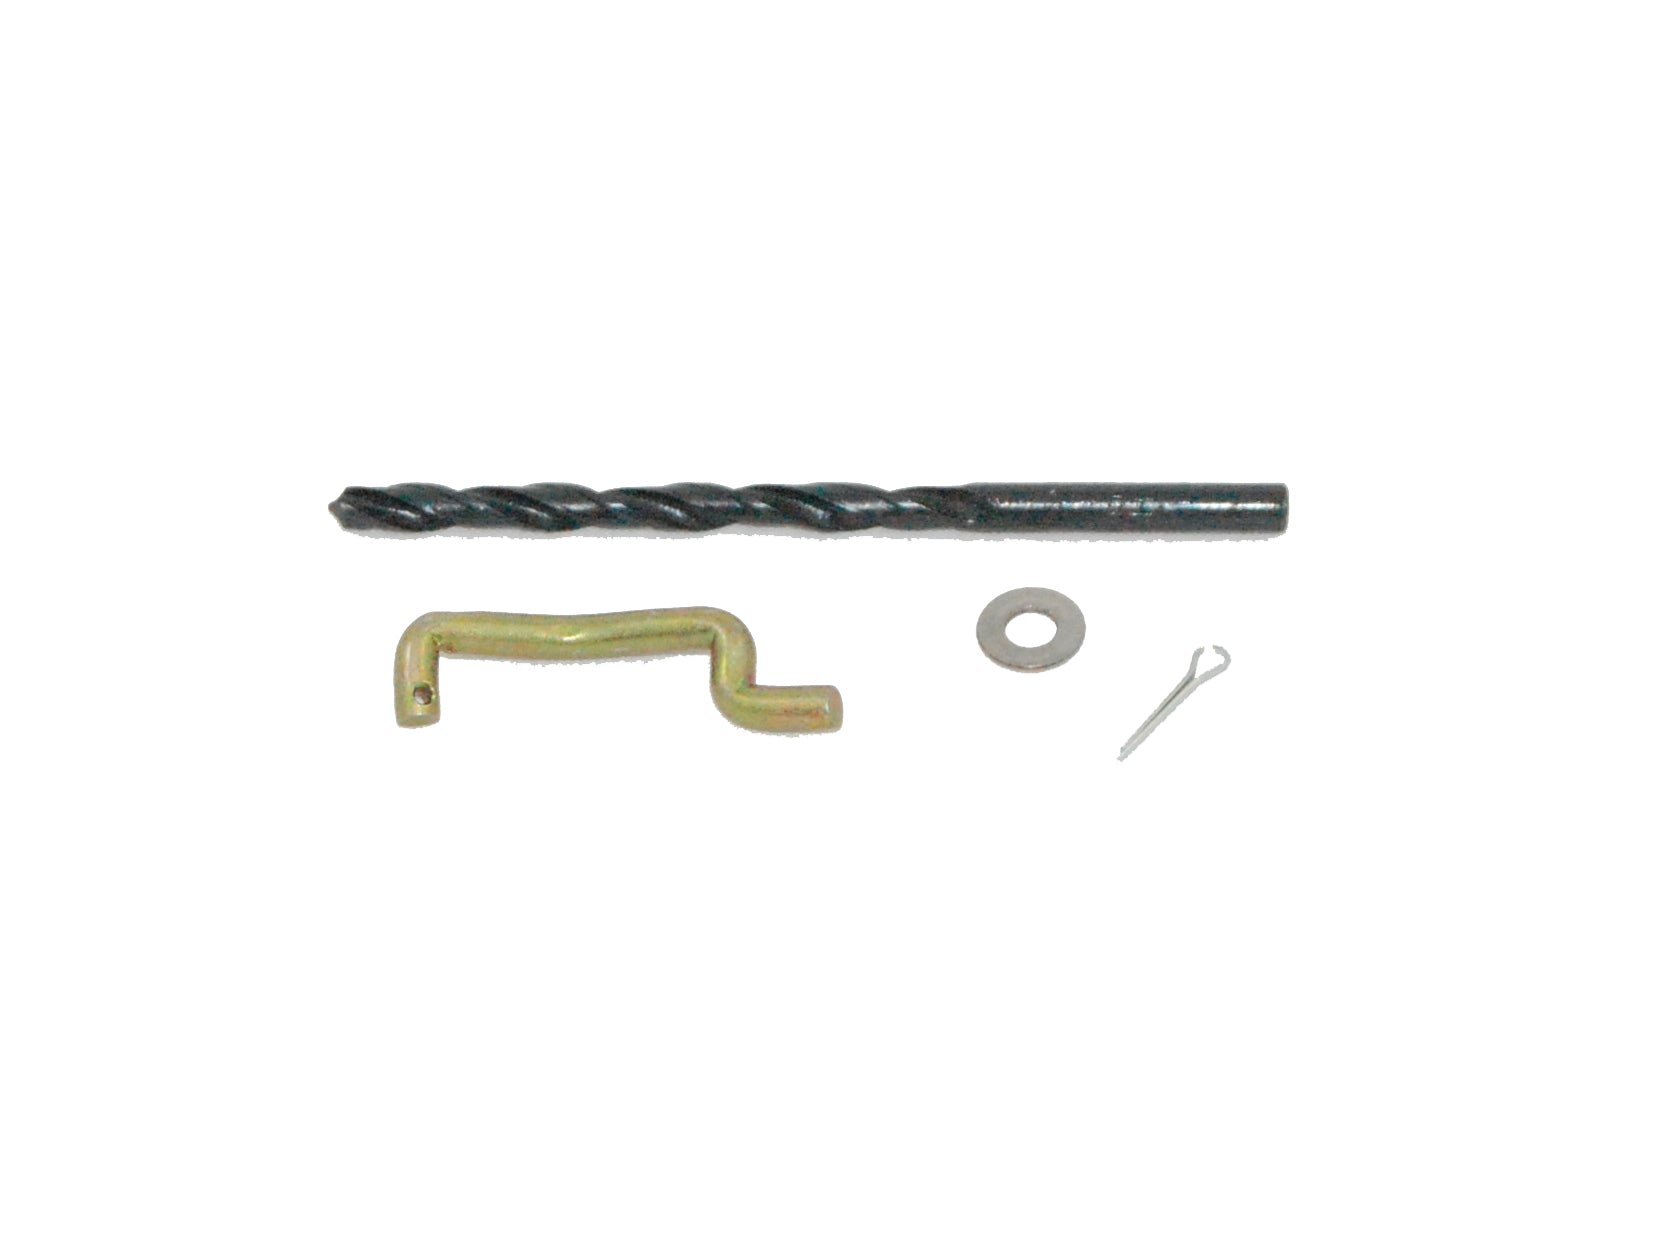 Advanced Engine Design 1 to 1 Throttle Linkage Kit AED6477